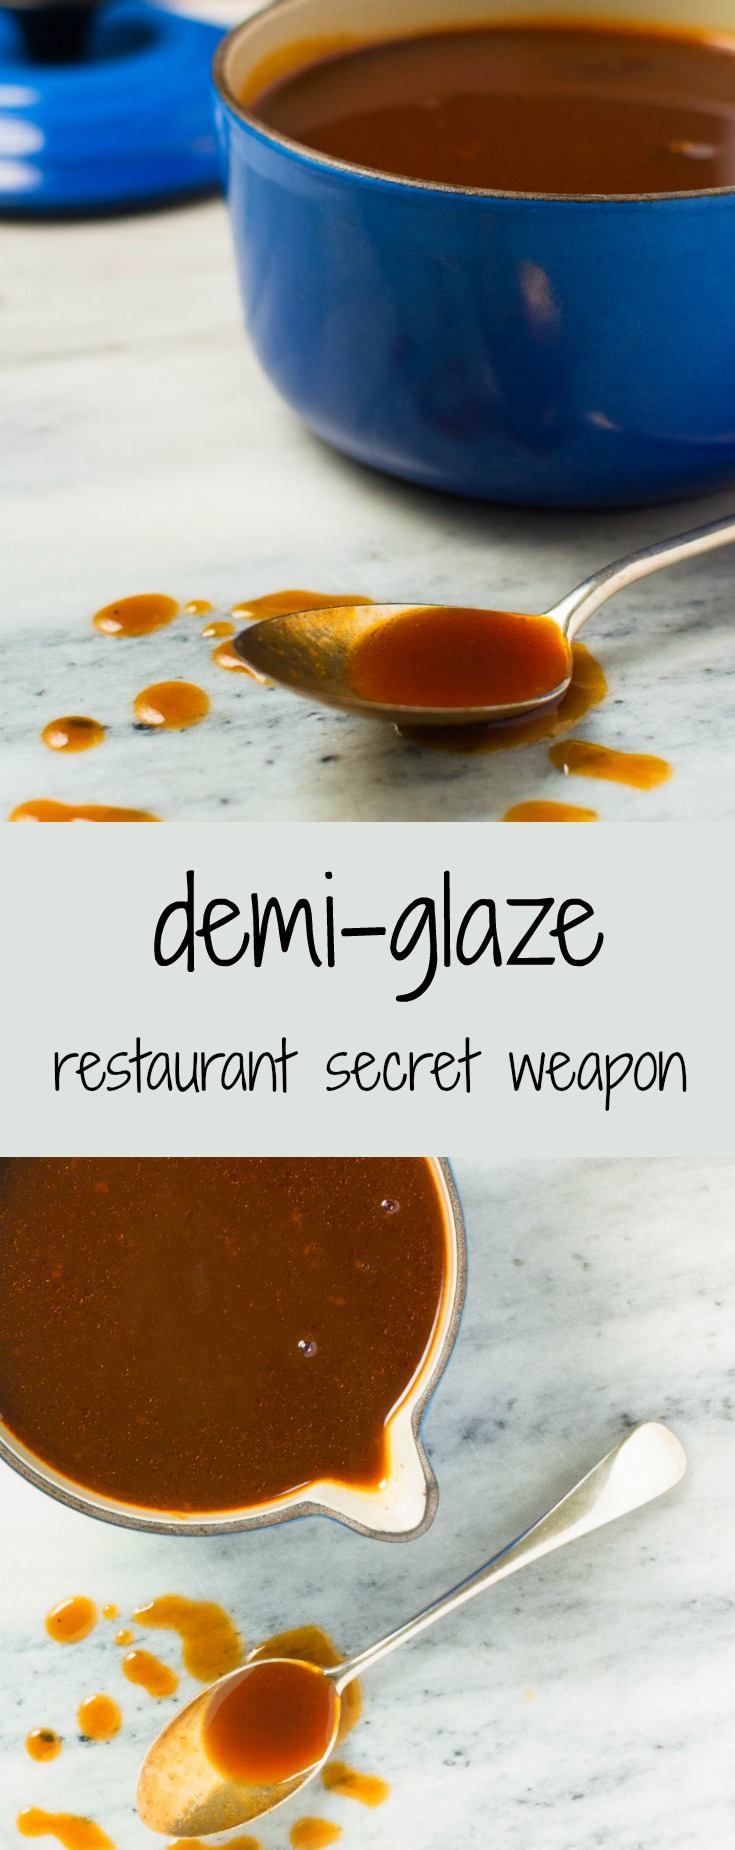 French demi glace makes just about any meat dish it's used with spectacular. Use it wisely - it's a flavour grenade.